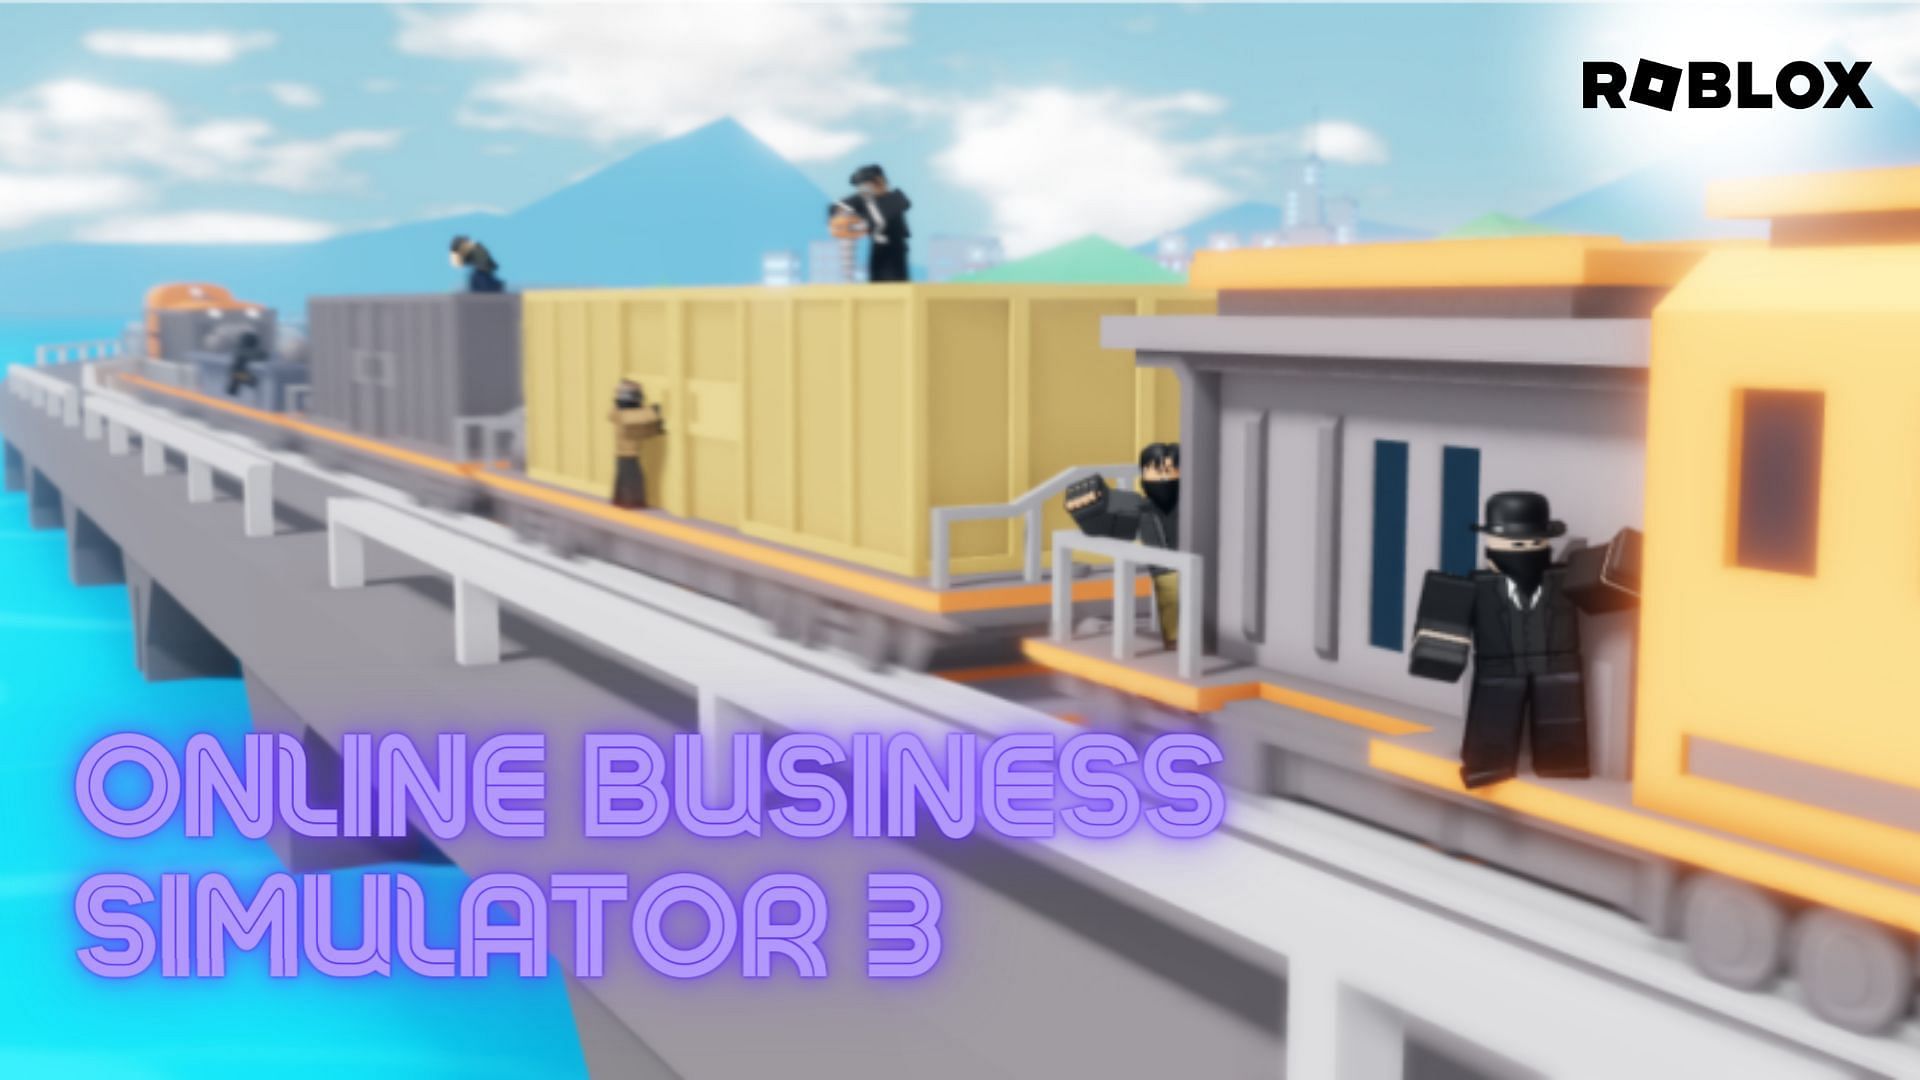 UPD 1] Online Business Simulator 3 - Roblox